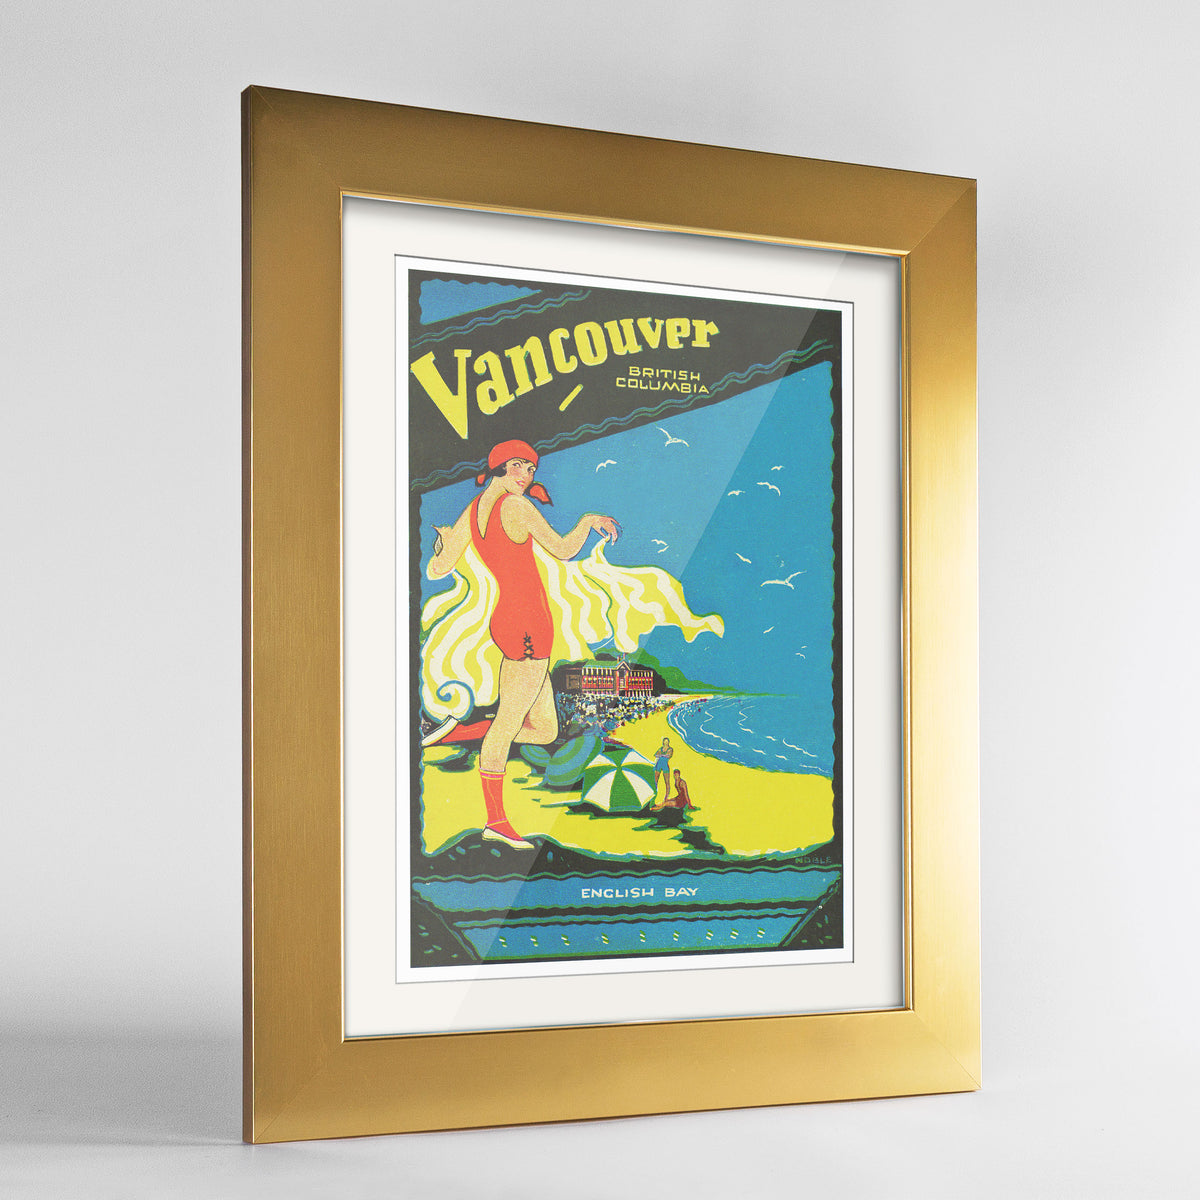 Museum of Vancouver archival art prints for purchase